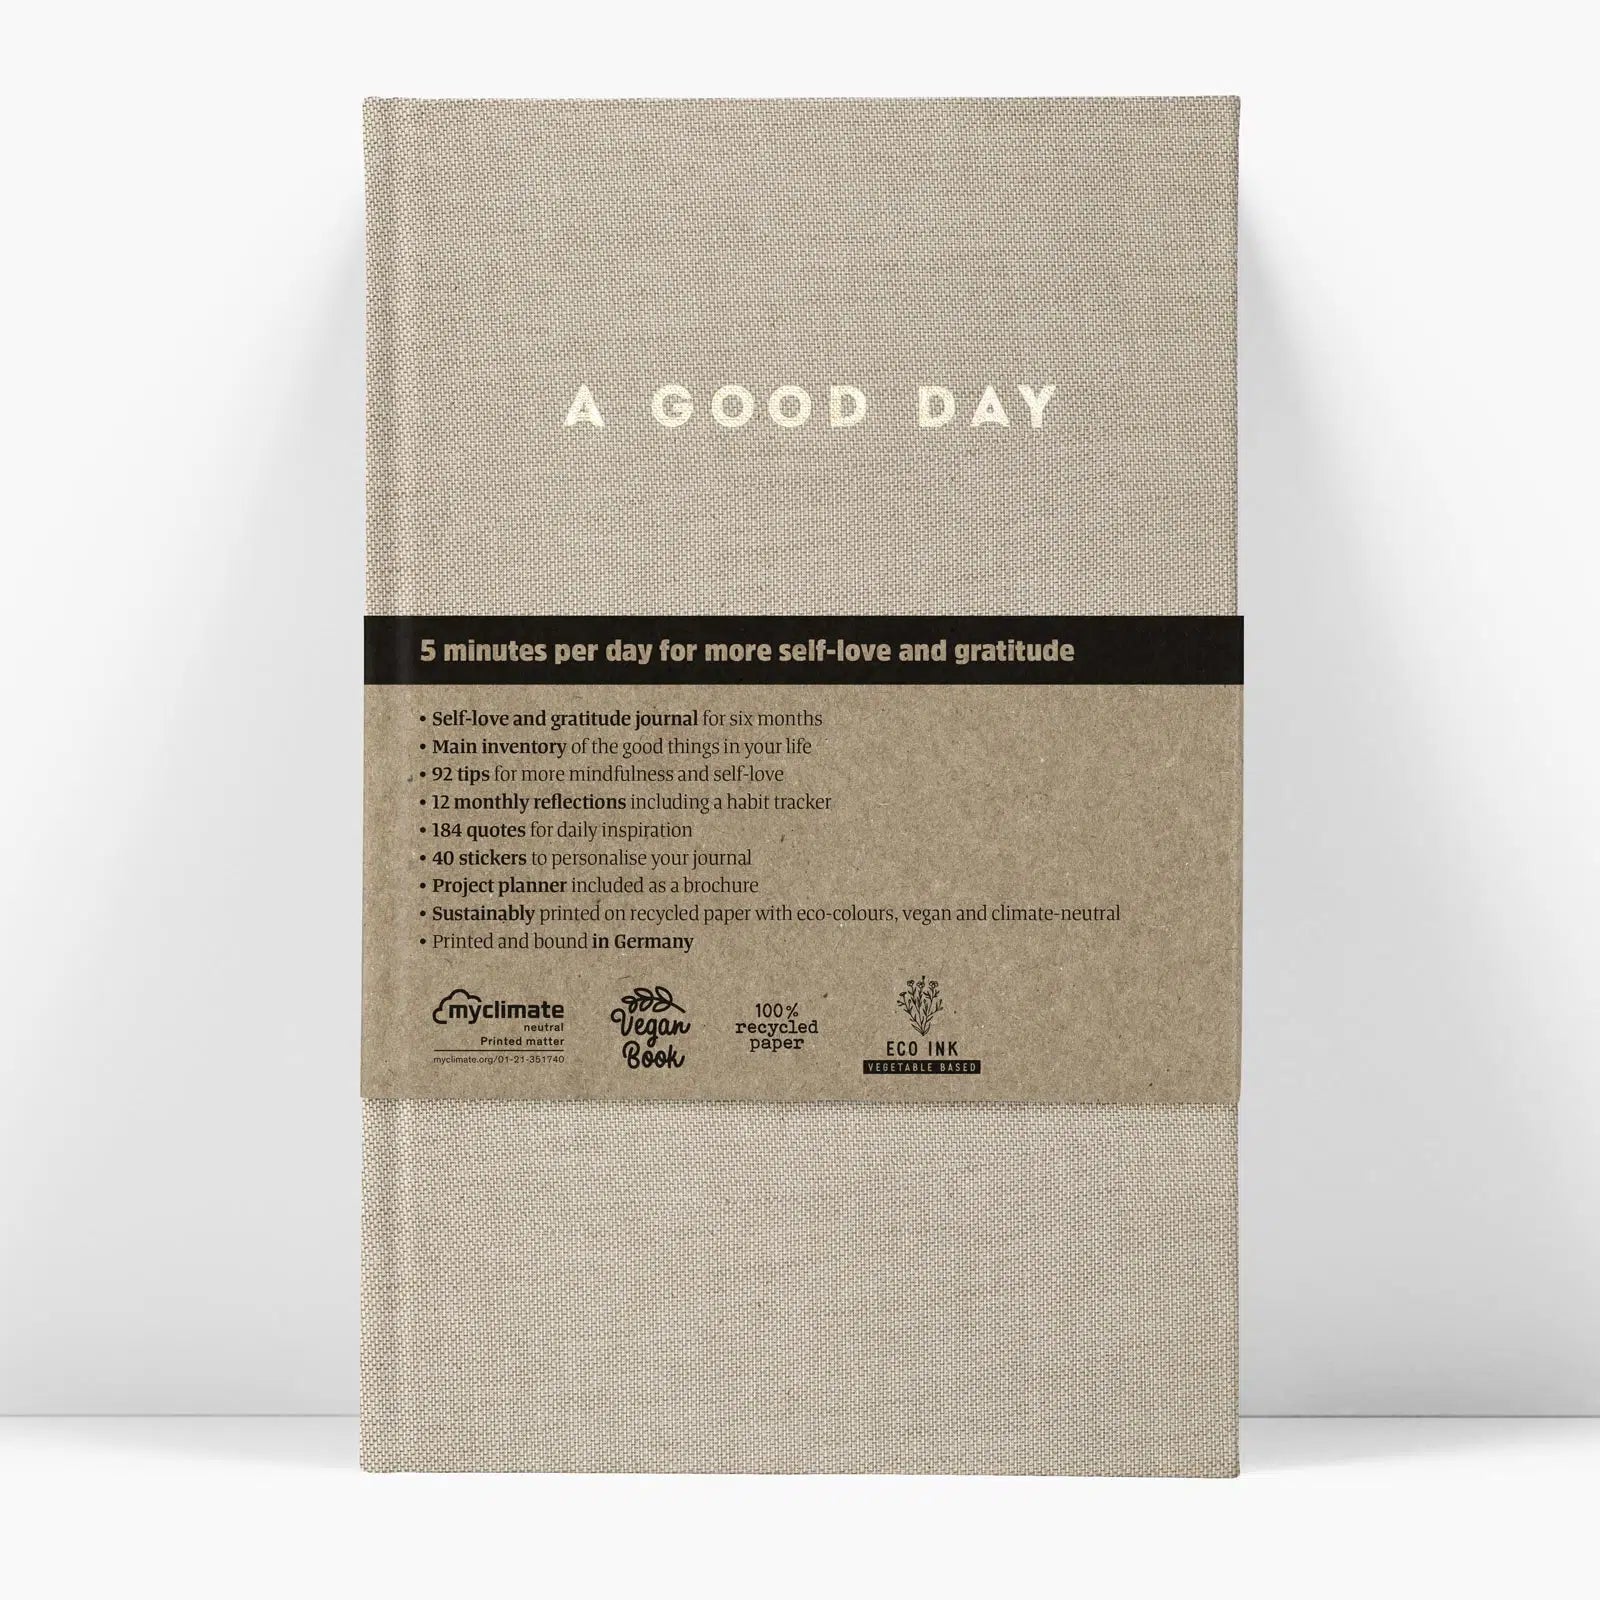 A Good Day in natural 5 minutes per day for more self-love and gratitude